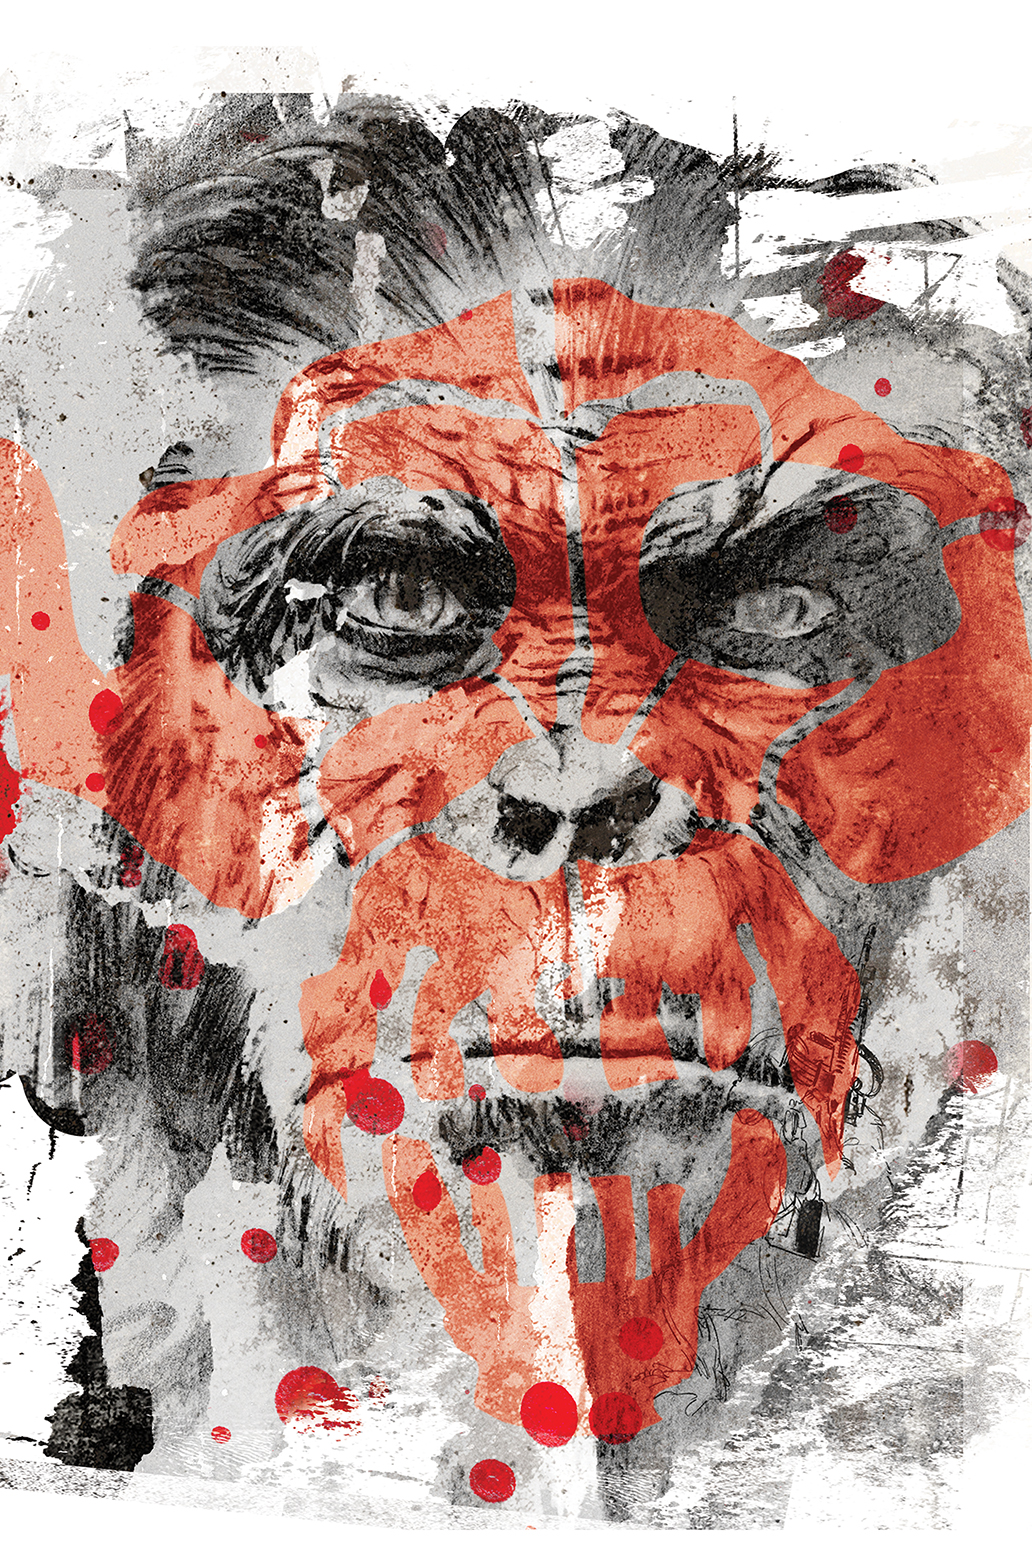 BOOM_Dawn_of_the_Planet_of_the_Apes_005_B